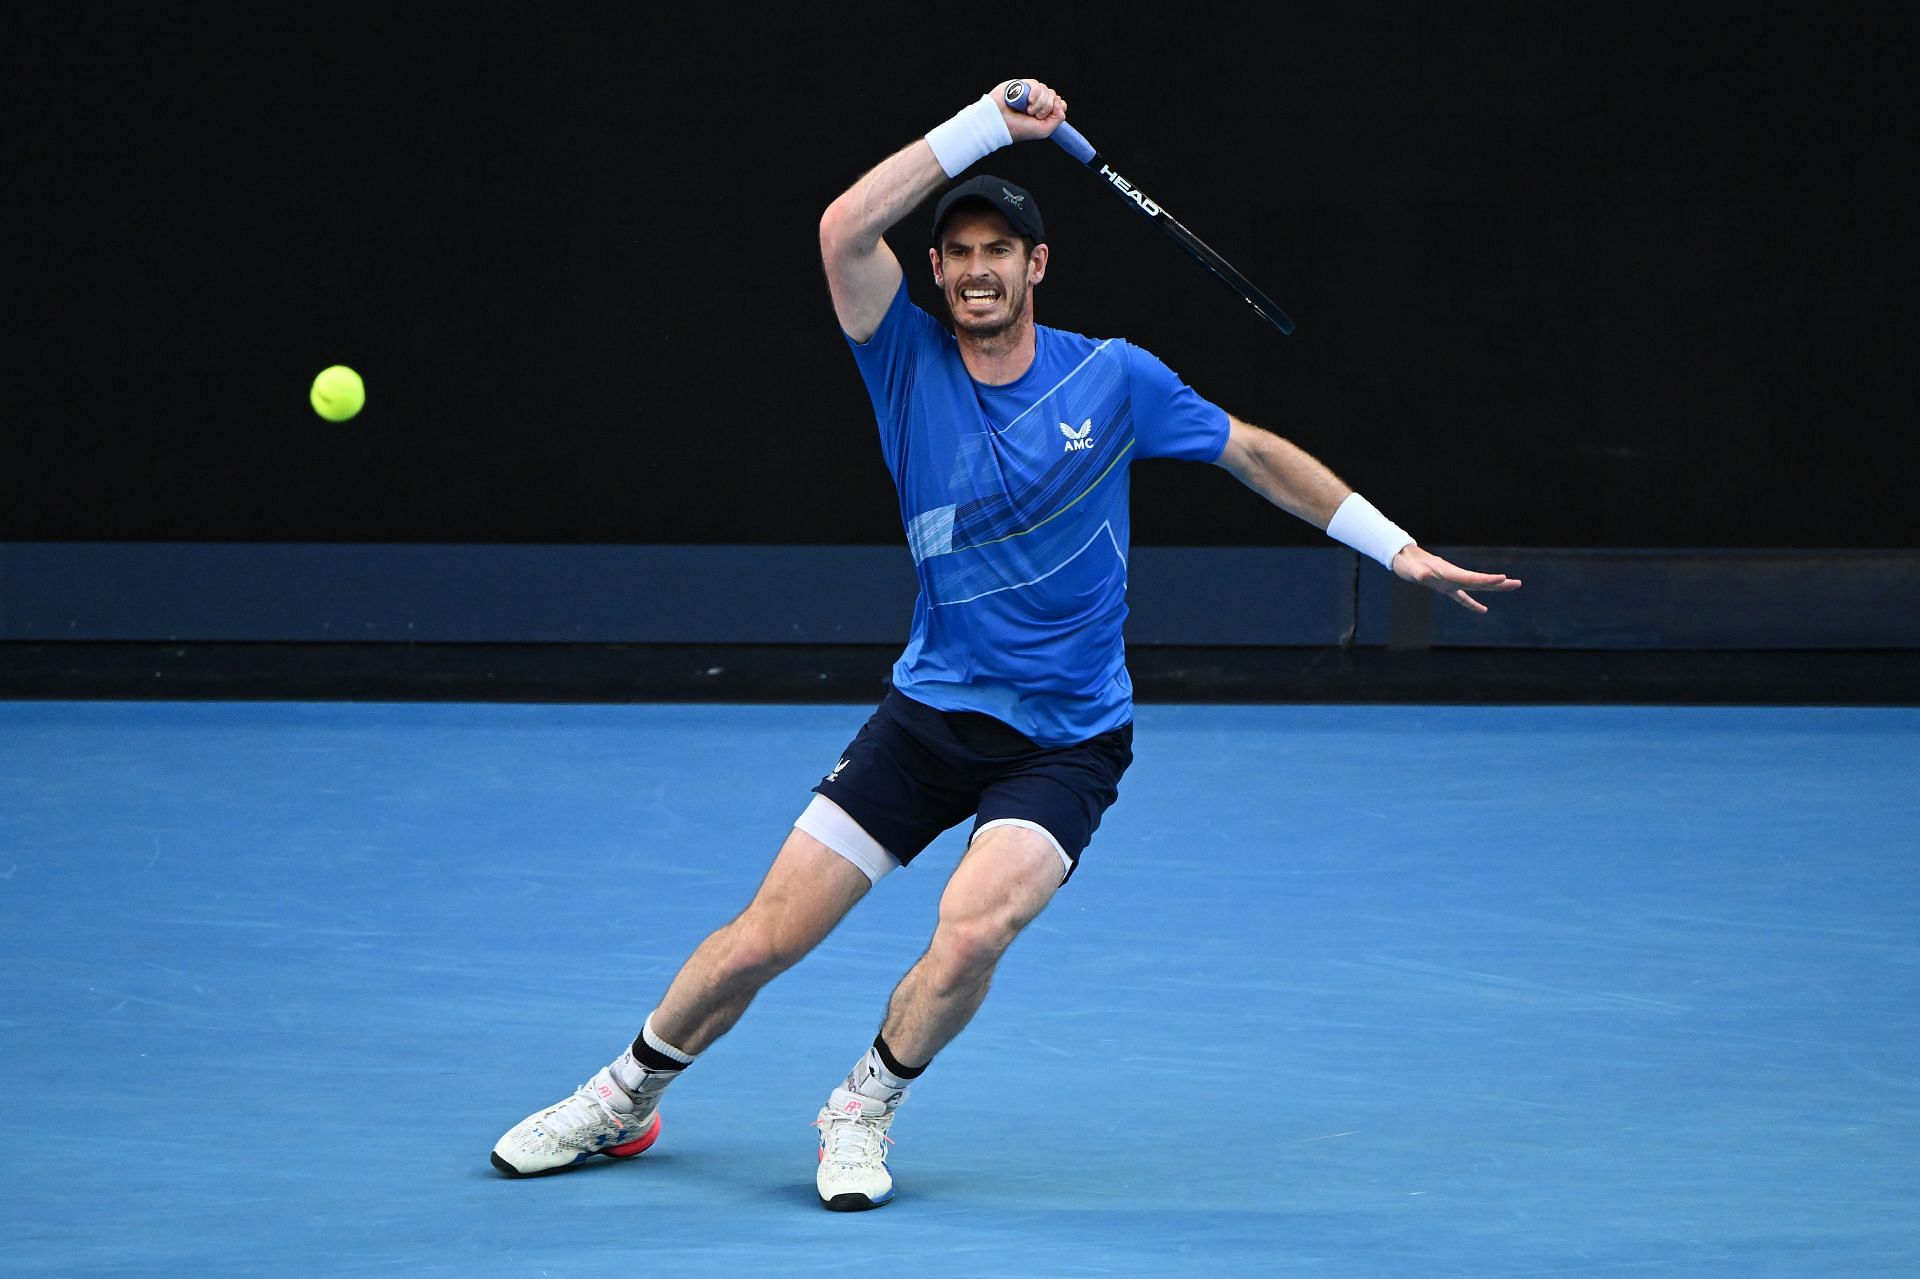 Andy Murray faces Felix Auger-Aliassime in the second round of the Rotterdam Open